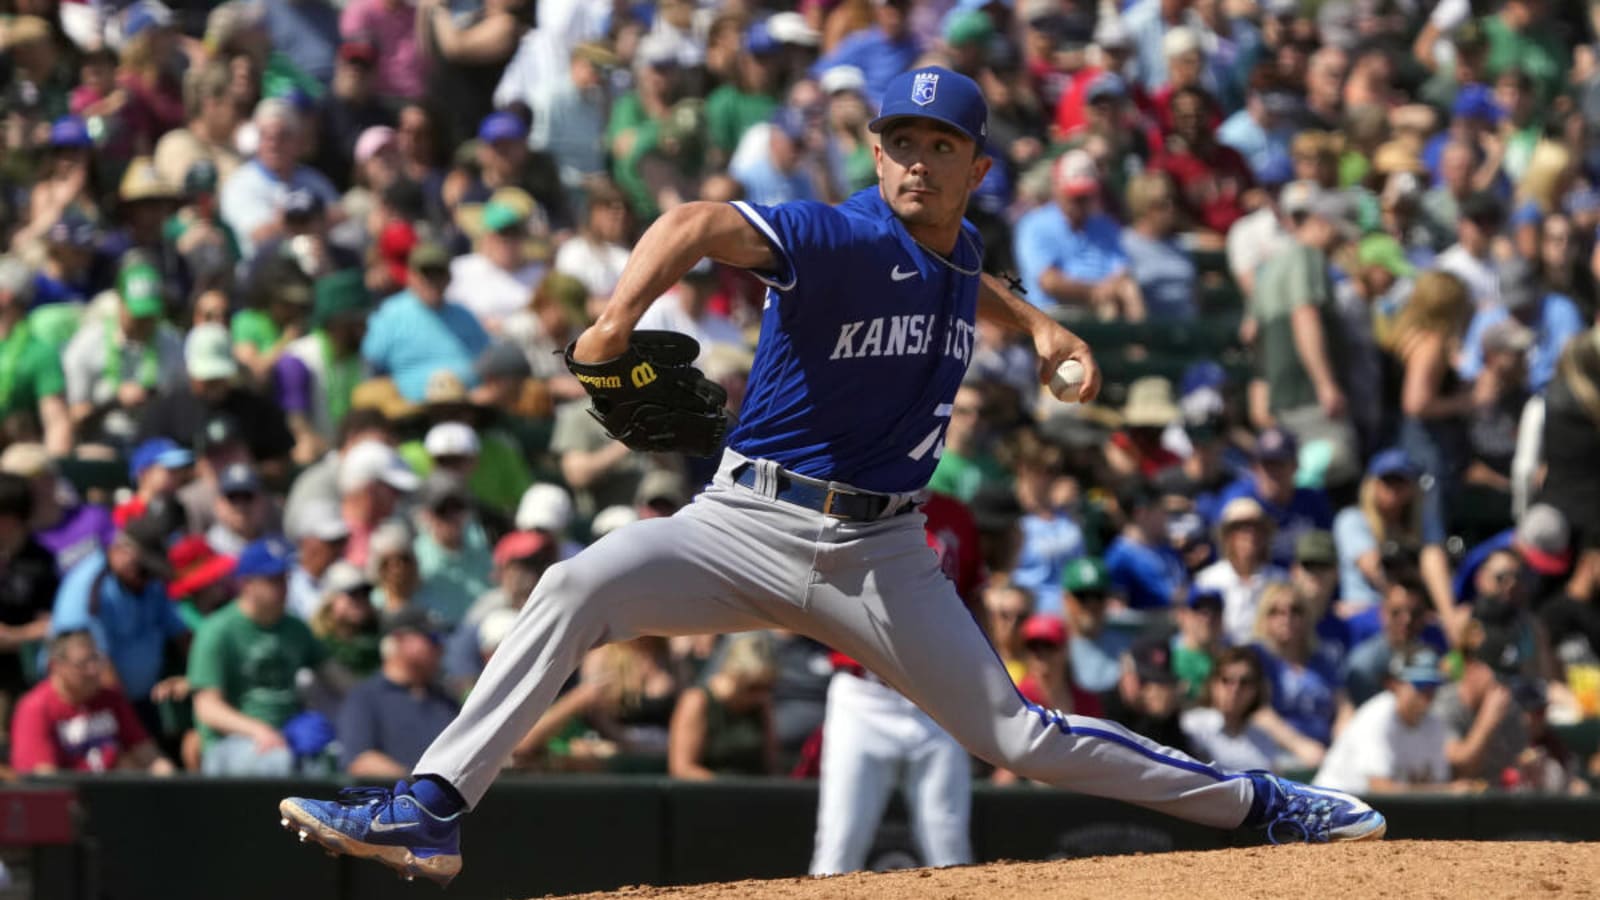 Kansas City Royals Pitching Prospect Suffers Torn UCL at Spring Training